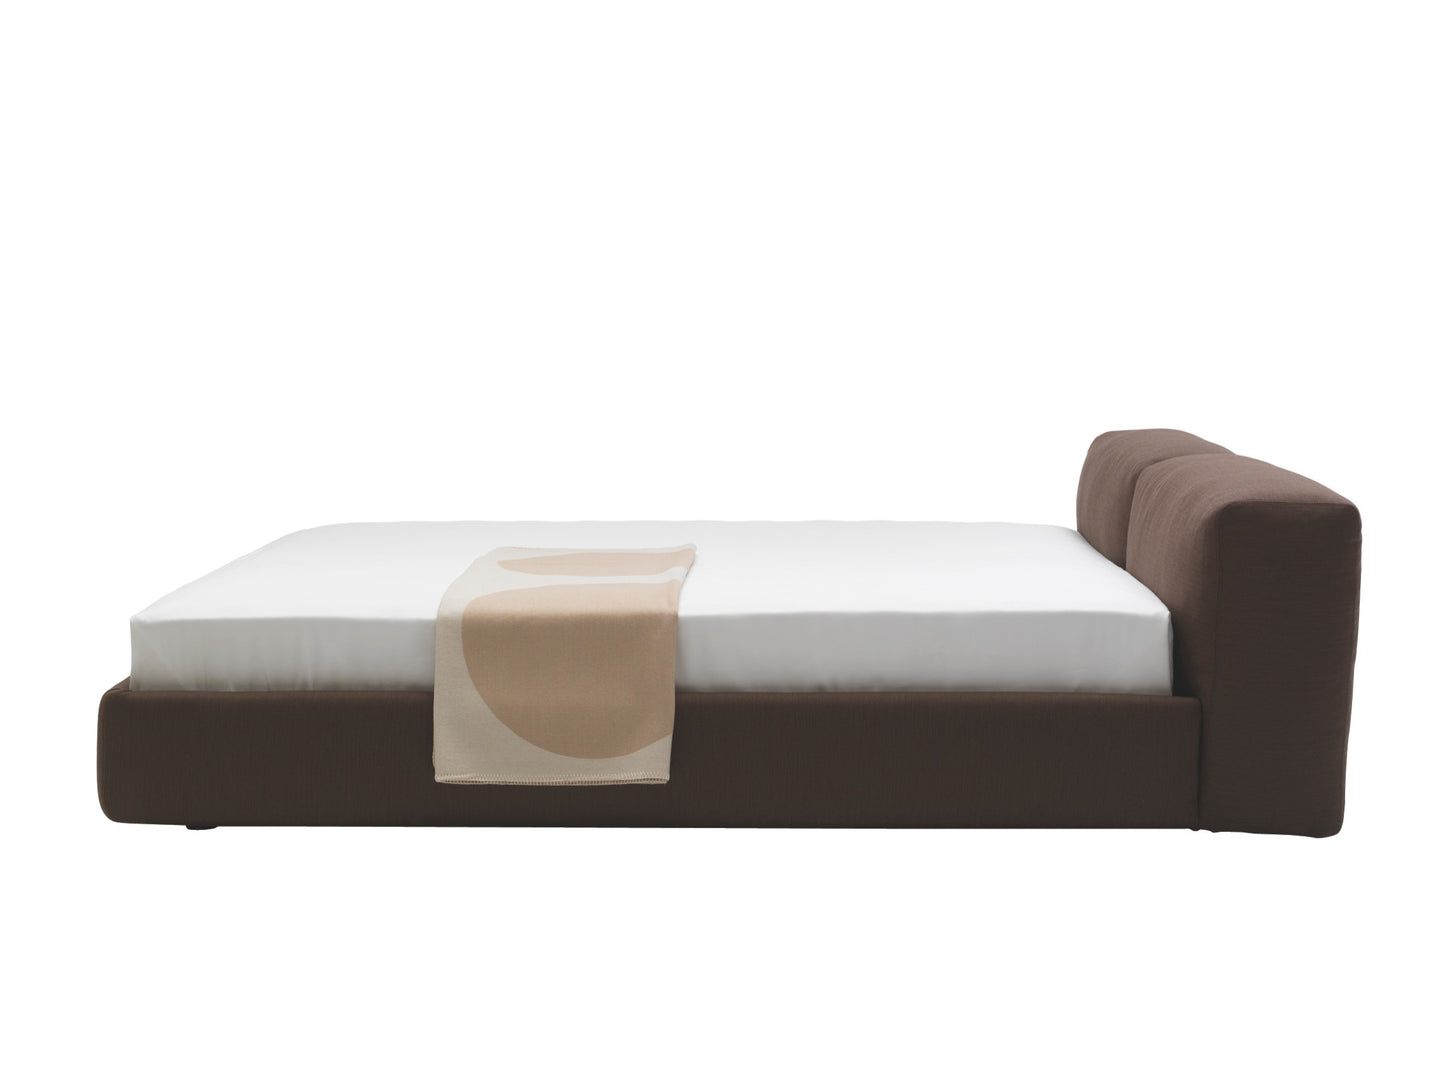 Cappellini Superoblong Bed